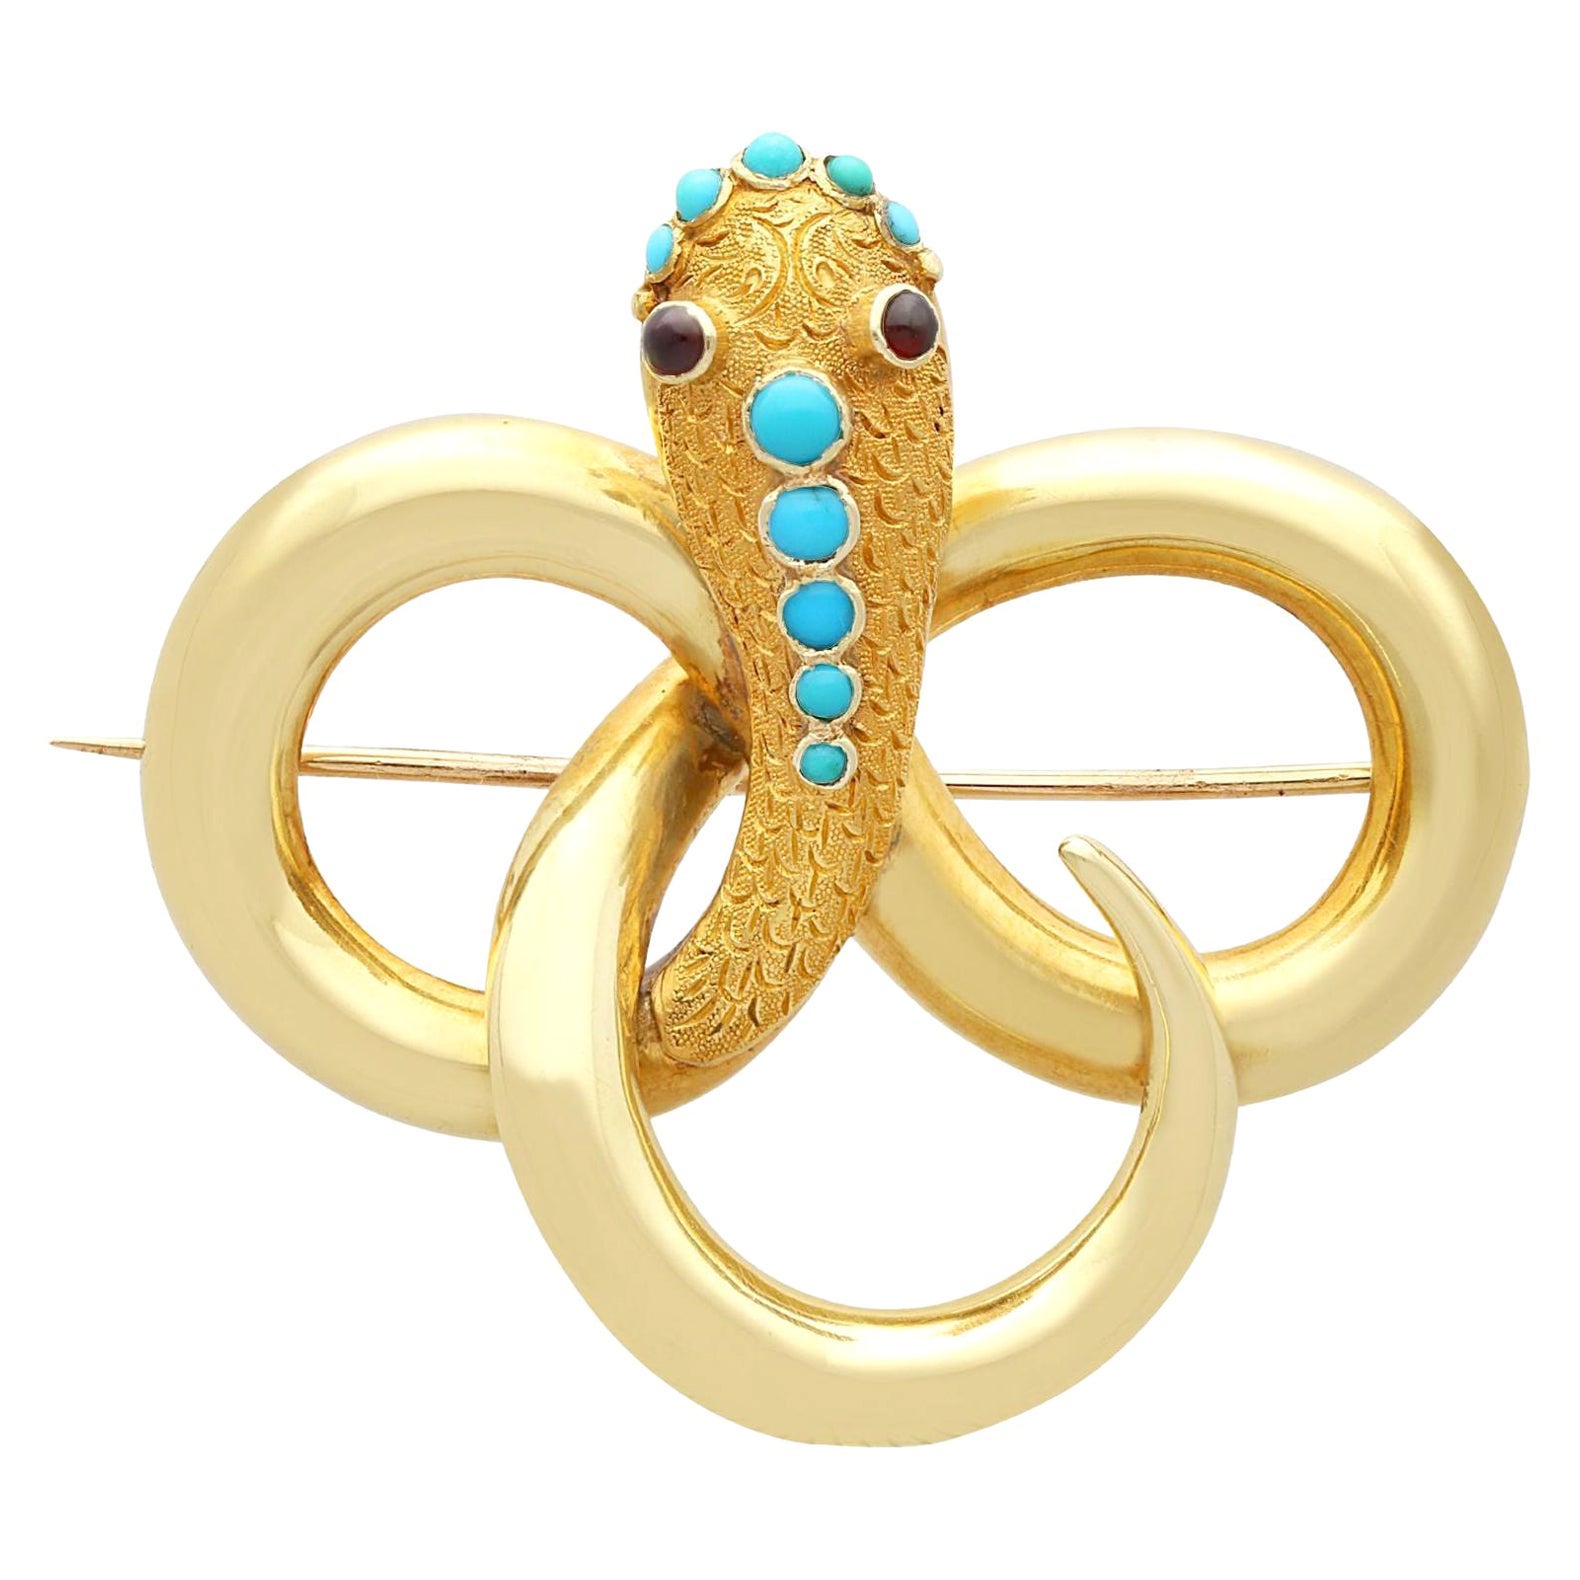 Antique 0.37 Carat Turquoise and Garnet Yellow Gold Snake Brooch For Sale